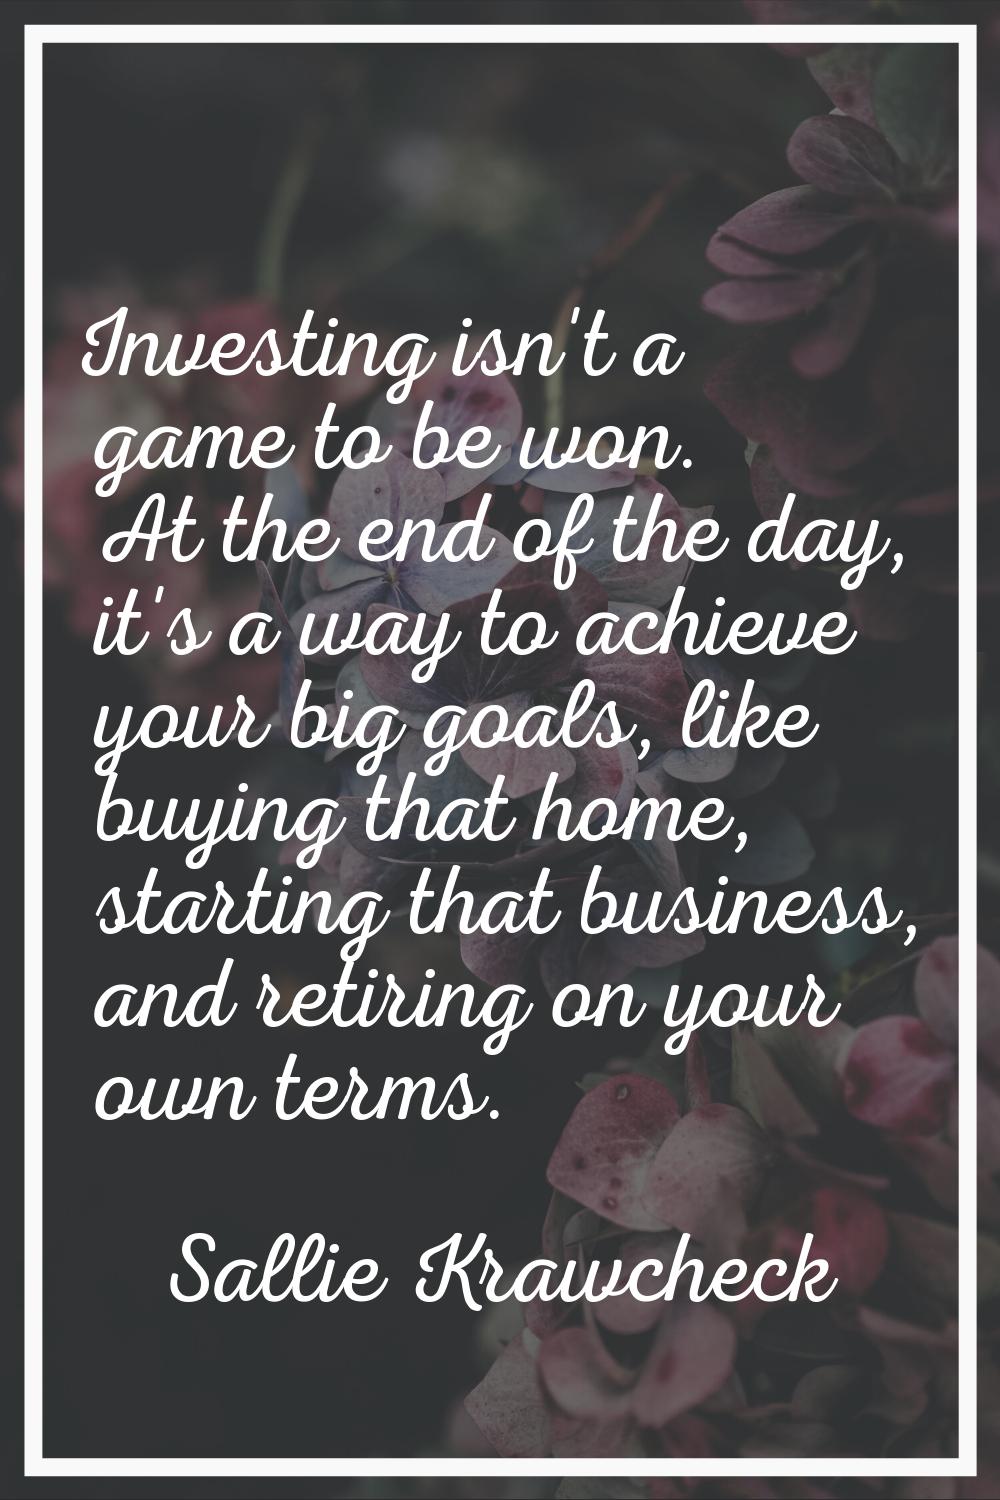 Investing isn't a game to be won. At the end of the day, it's a way to achieve your big goals, like